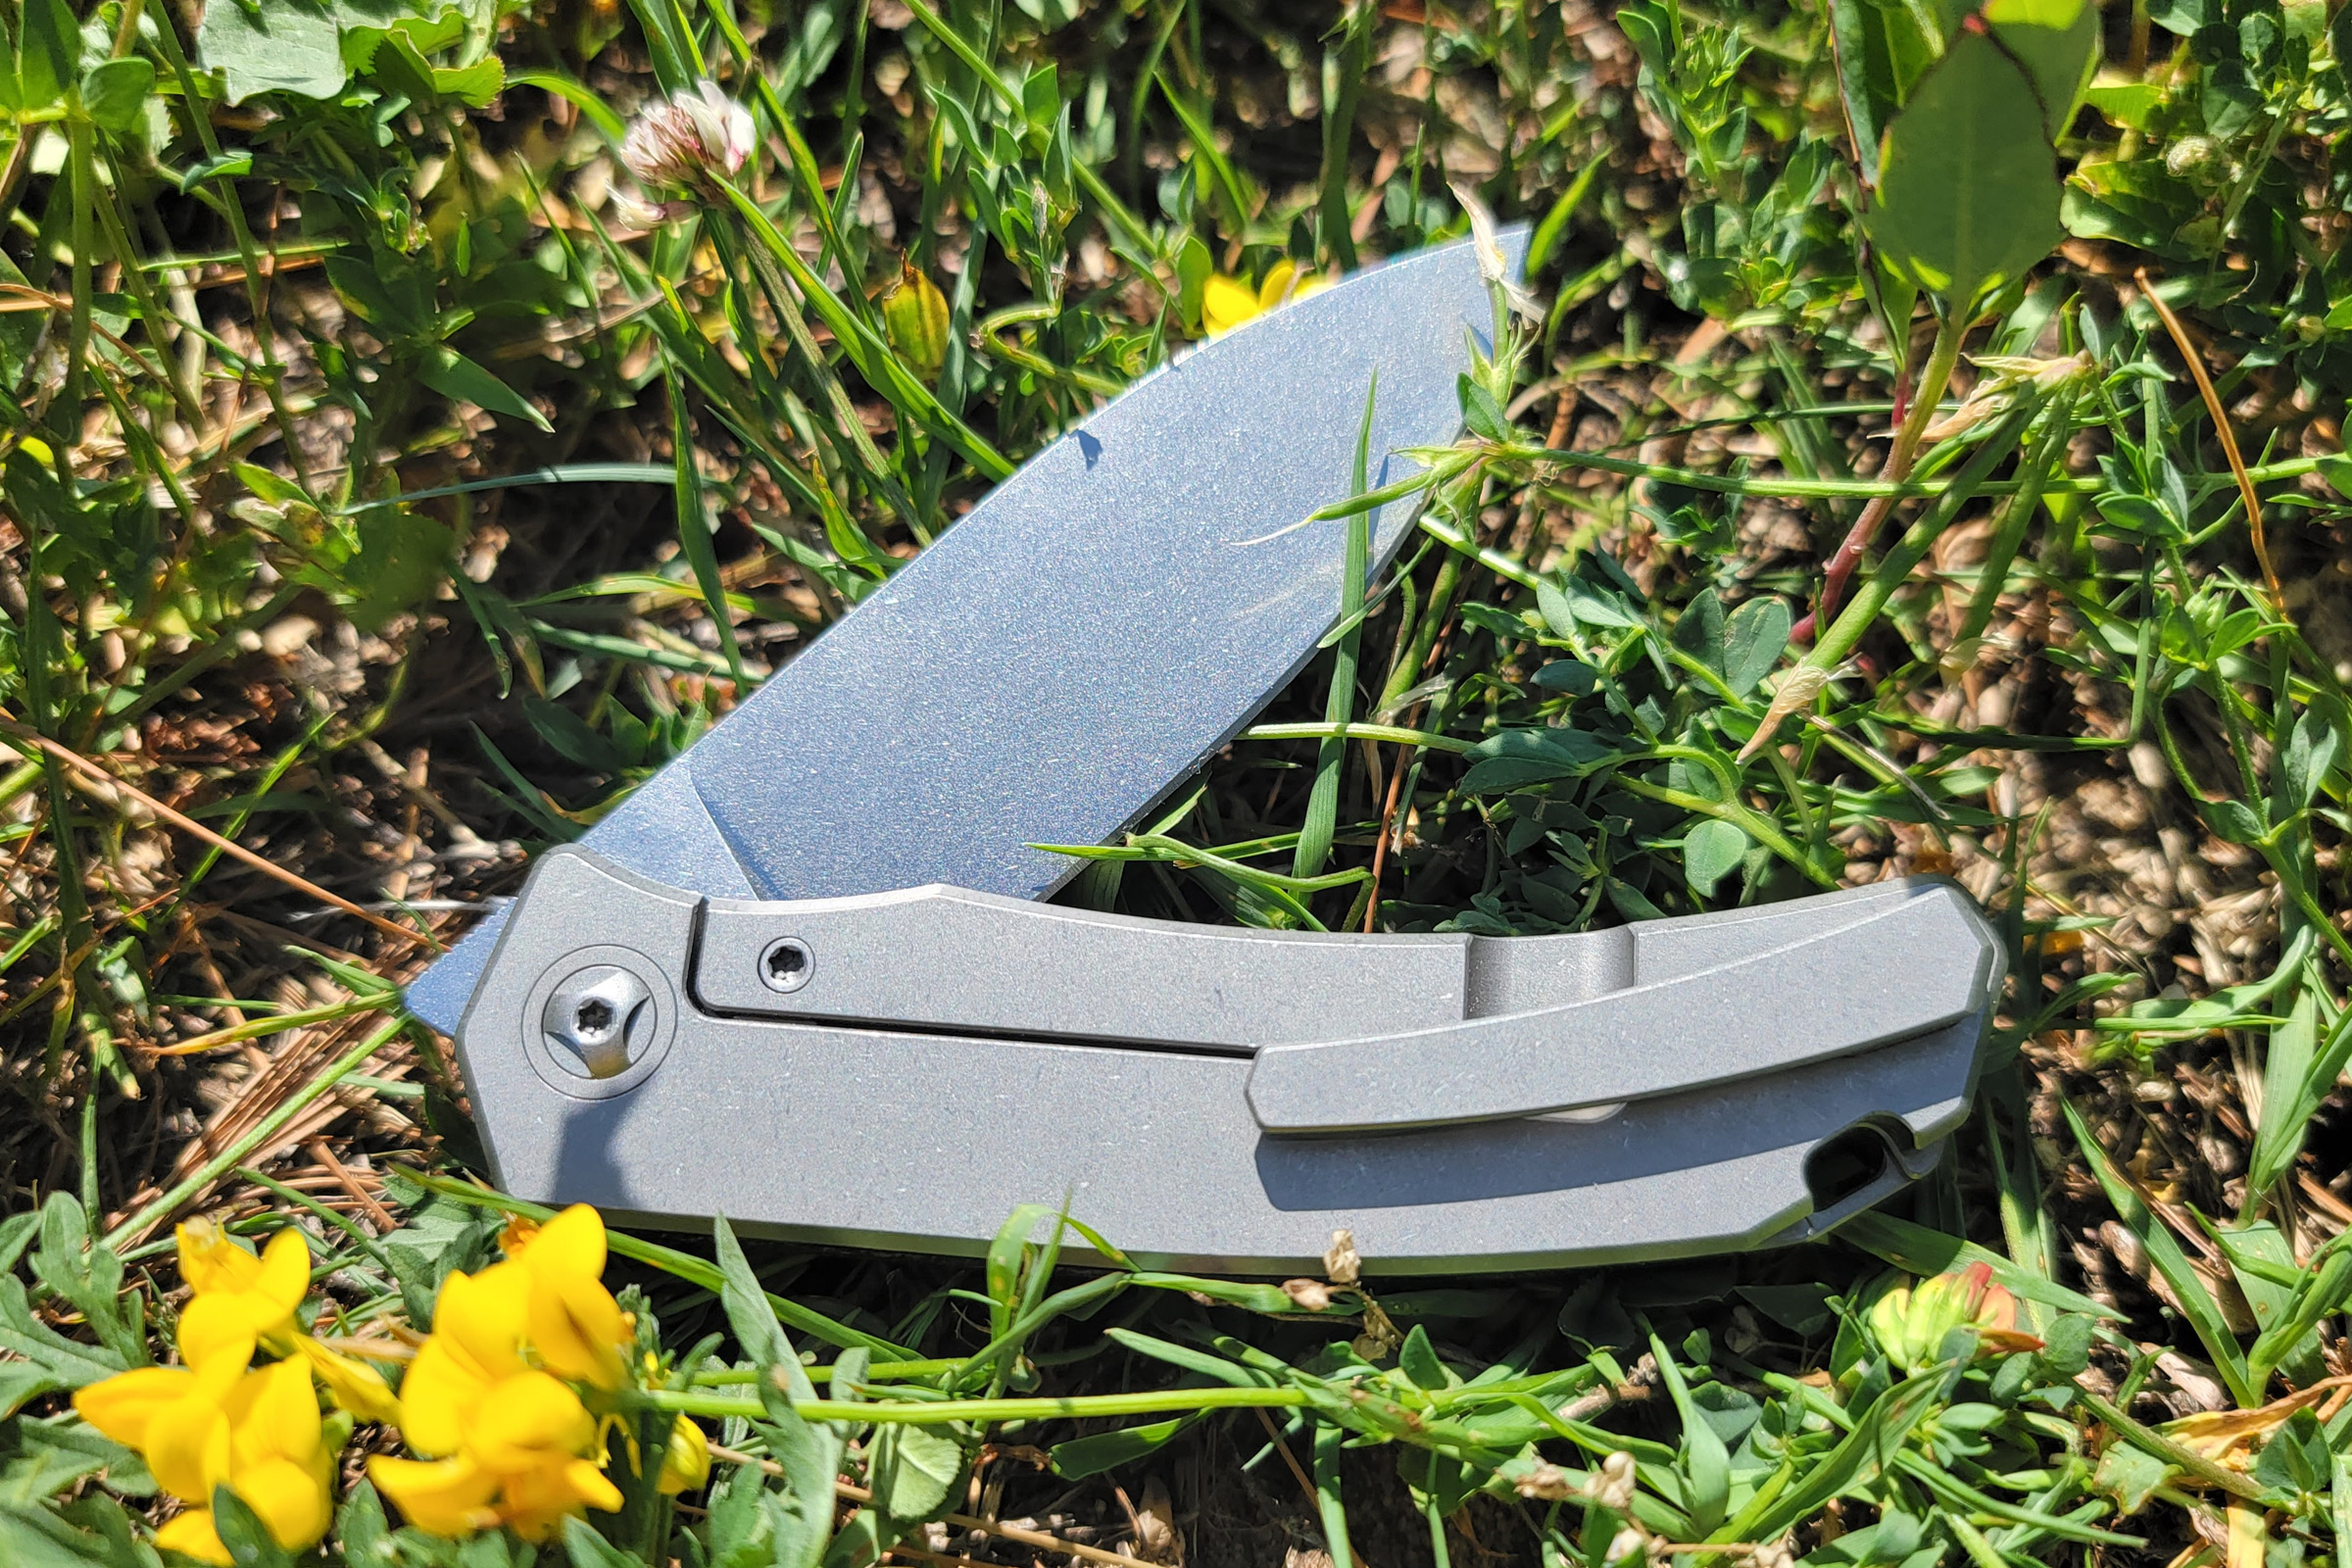 Site-Wide Knife Sale at Blade HQ: Save Over 50% on CRKT, Kershaw, Gerber, and More